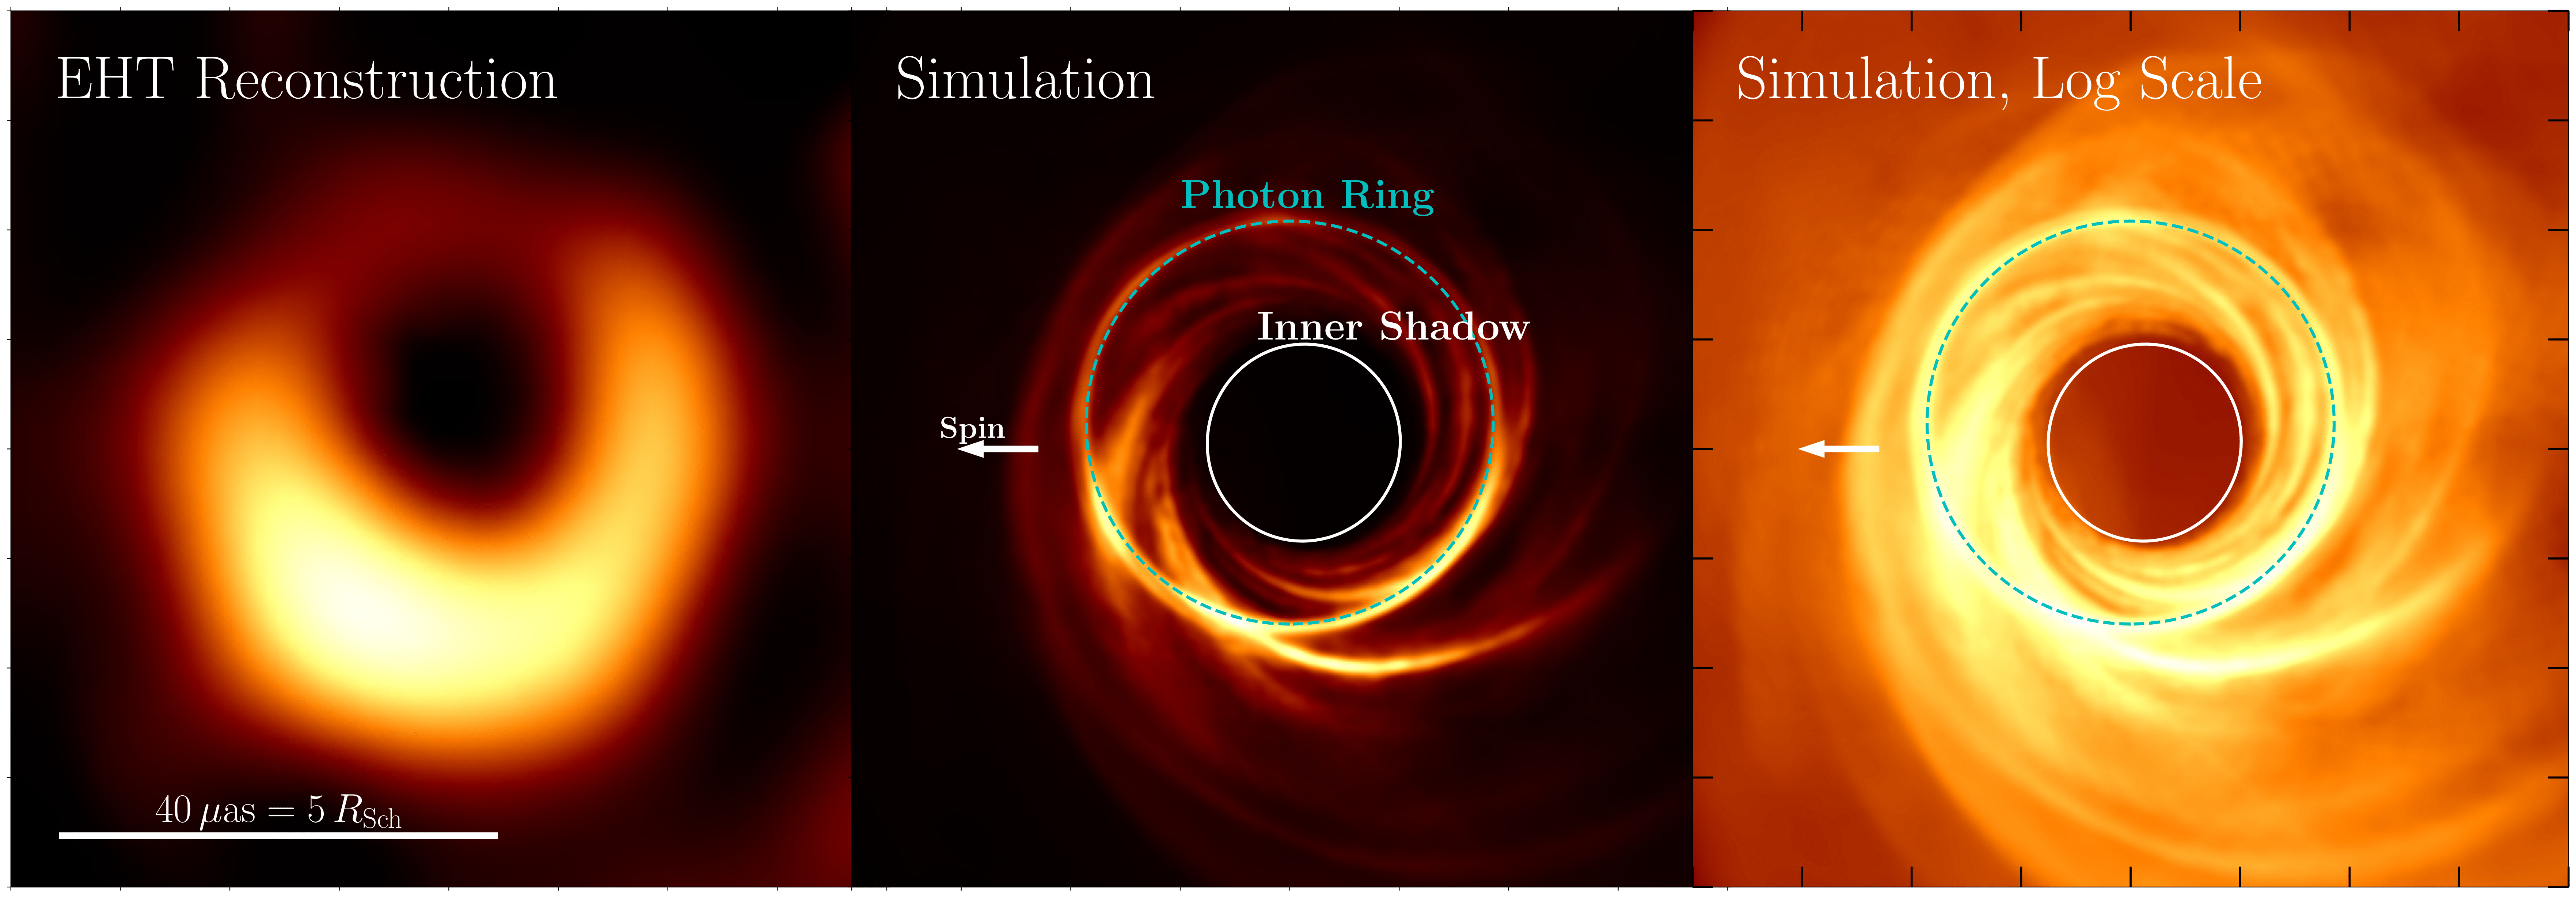 The inner shadow of M87 in my simulation images